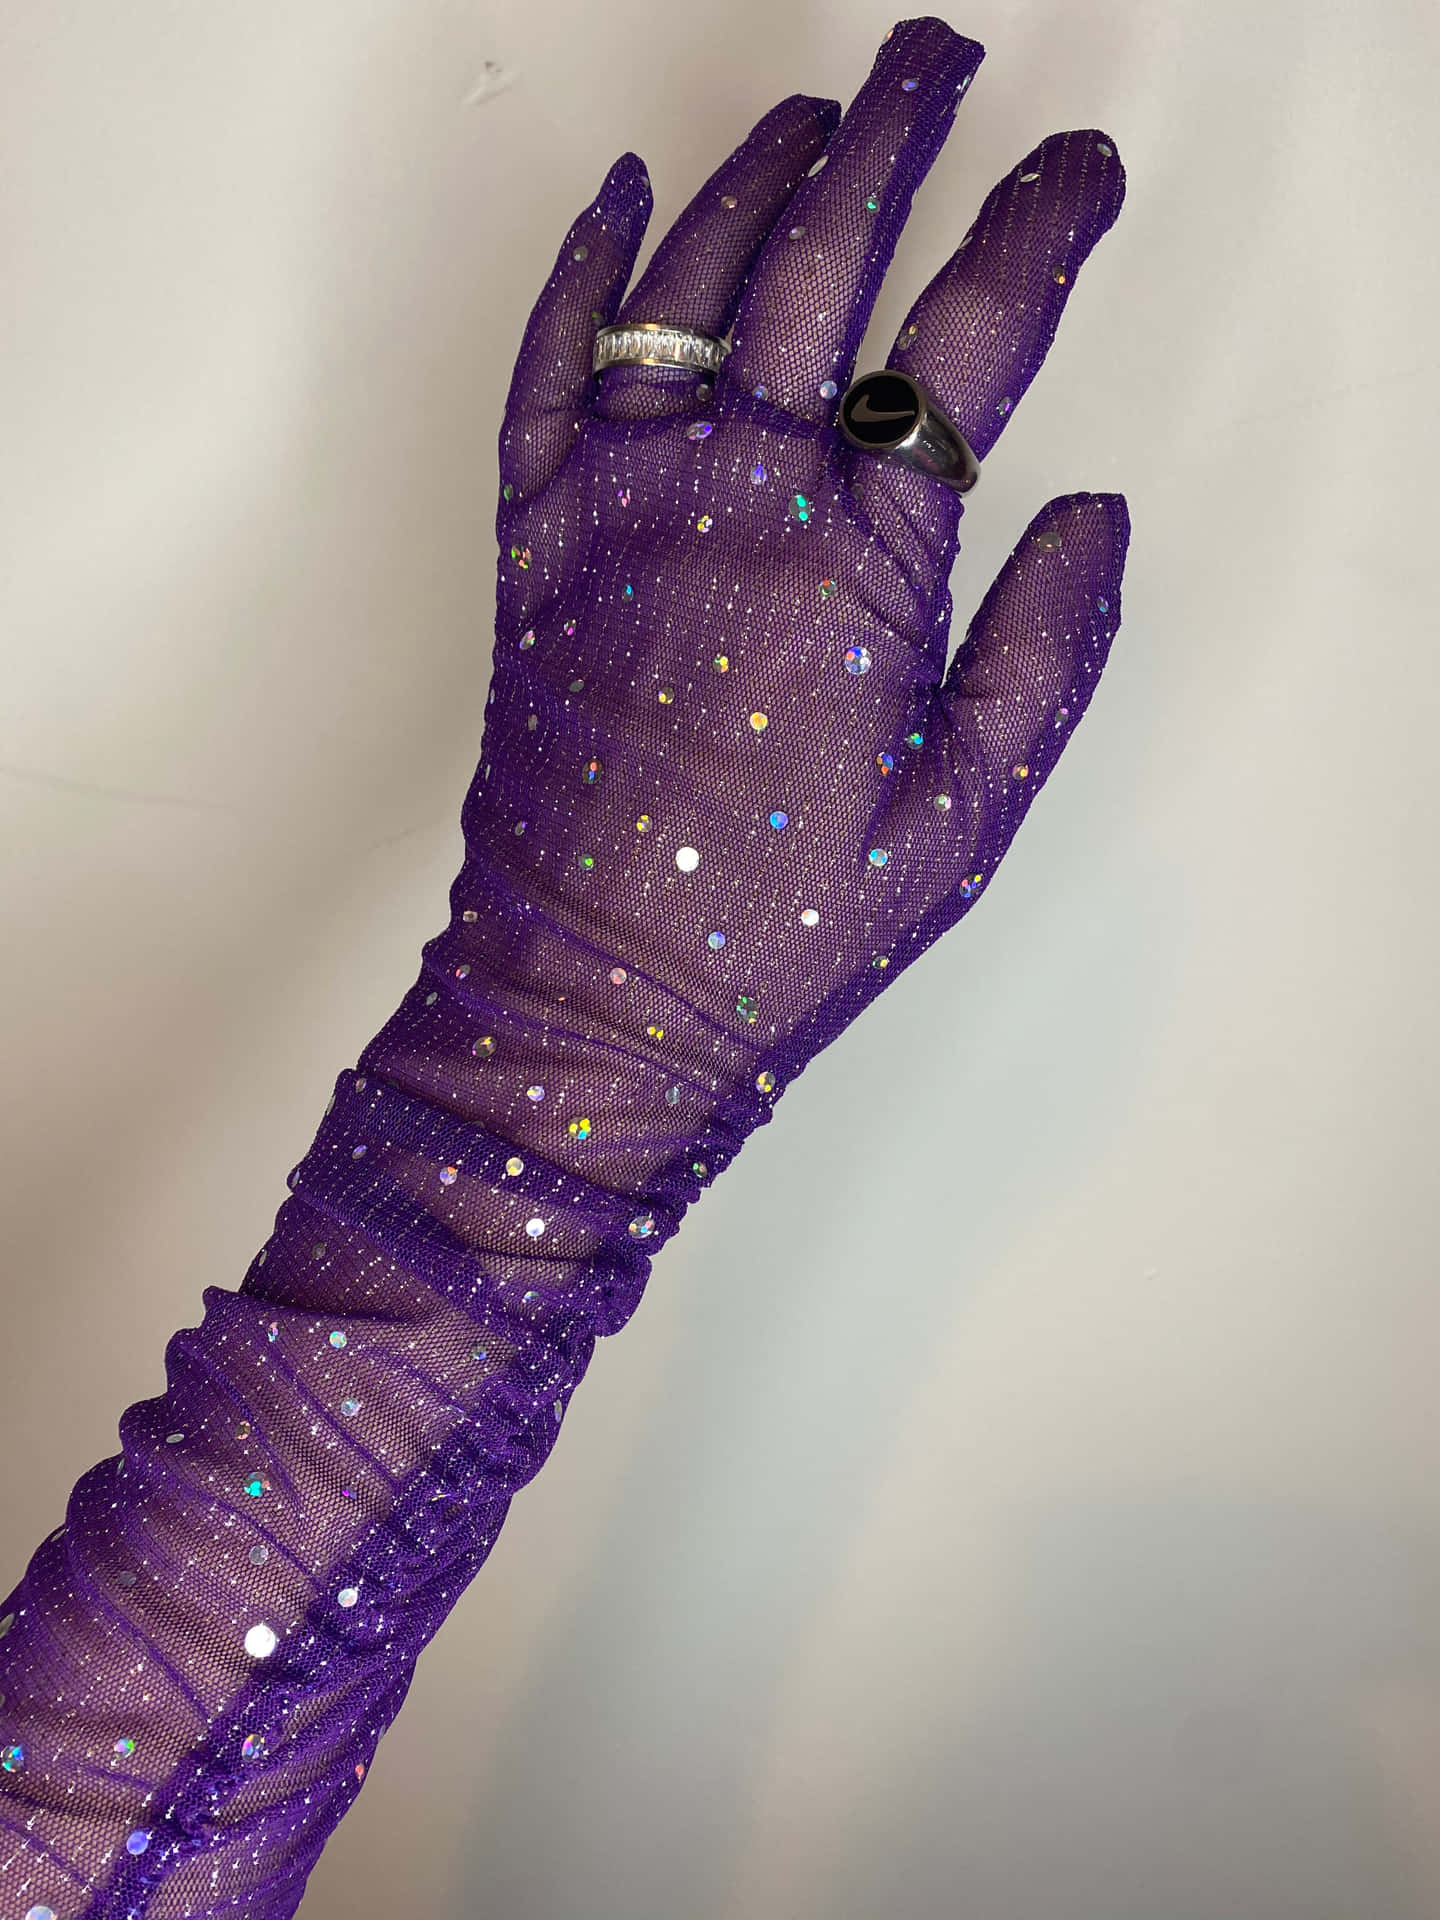 Add a pop of color to your wardrobe with Purple Gloves. Wallpaper